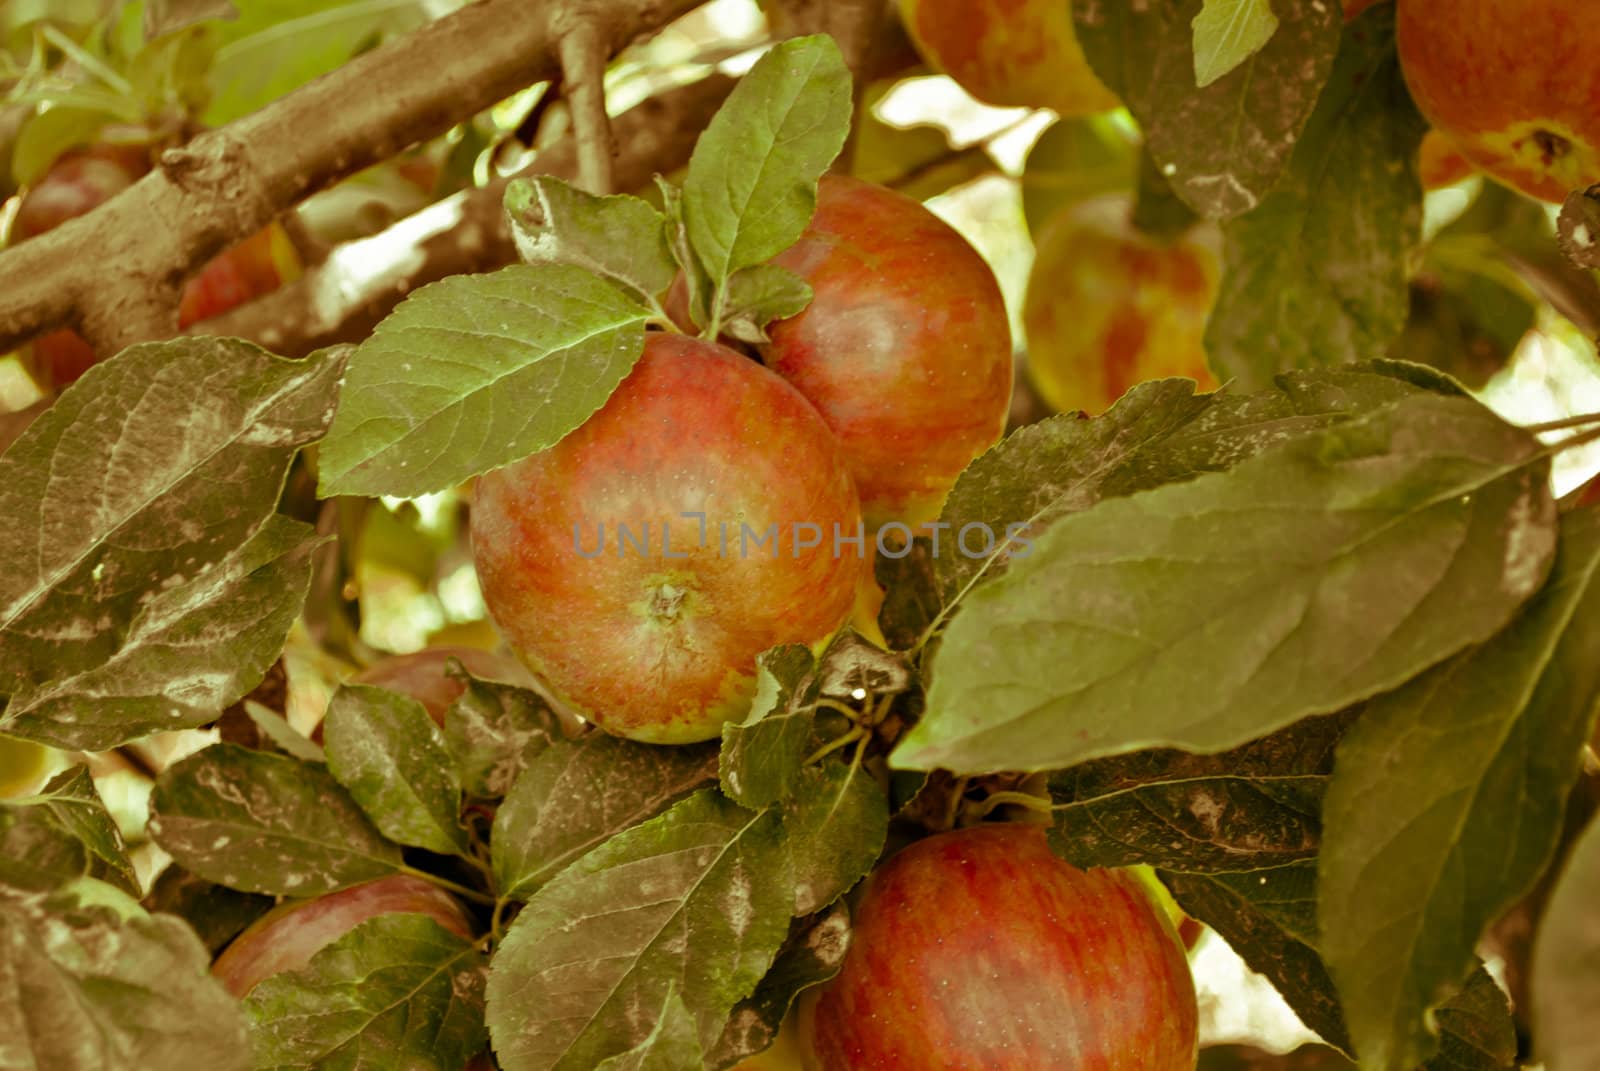 Cluster of ripe apples on a tree branch in autumn